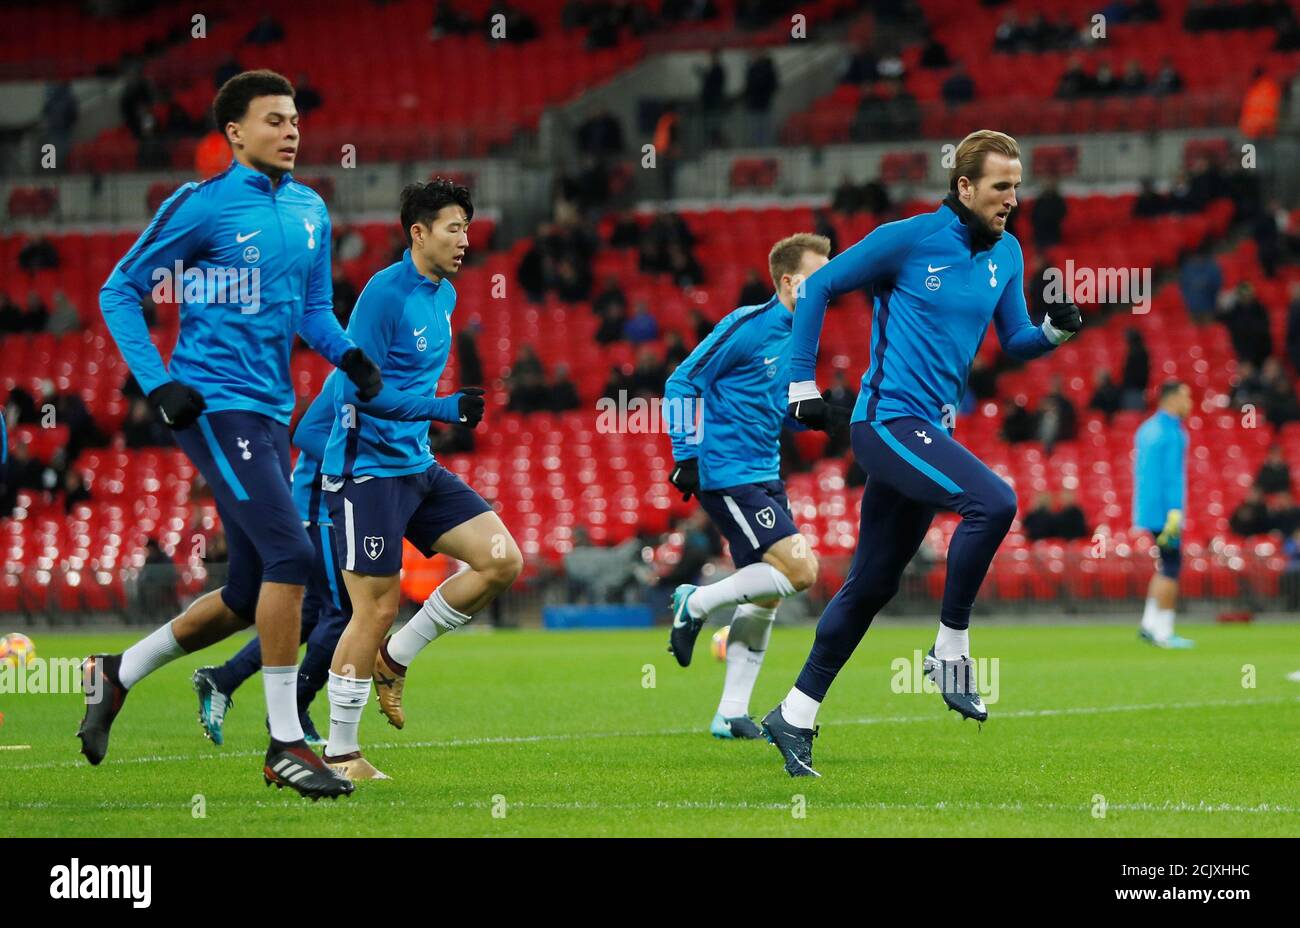 Soccer Football - Premier League - Tottenham Hotspur vs West Ham United - Wembley Stadium, London, Britain - January 4, 2018   Tottenham's Harry Kane, Son Heung-min and Dele Alli warm up before the match   REUTERS/Eddie Keogh    EDITORIAL USE ONLY. No use with unauthorized audio, video, data, fixture lists, club/league logos or 'live' services. Online in-match use limited to 75 images, no video emulation. No use in betting, games or single club/league/player publications.  Please contact your account representative for further details. Stock Photo